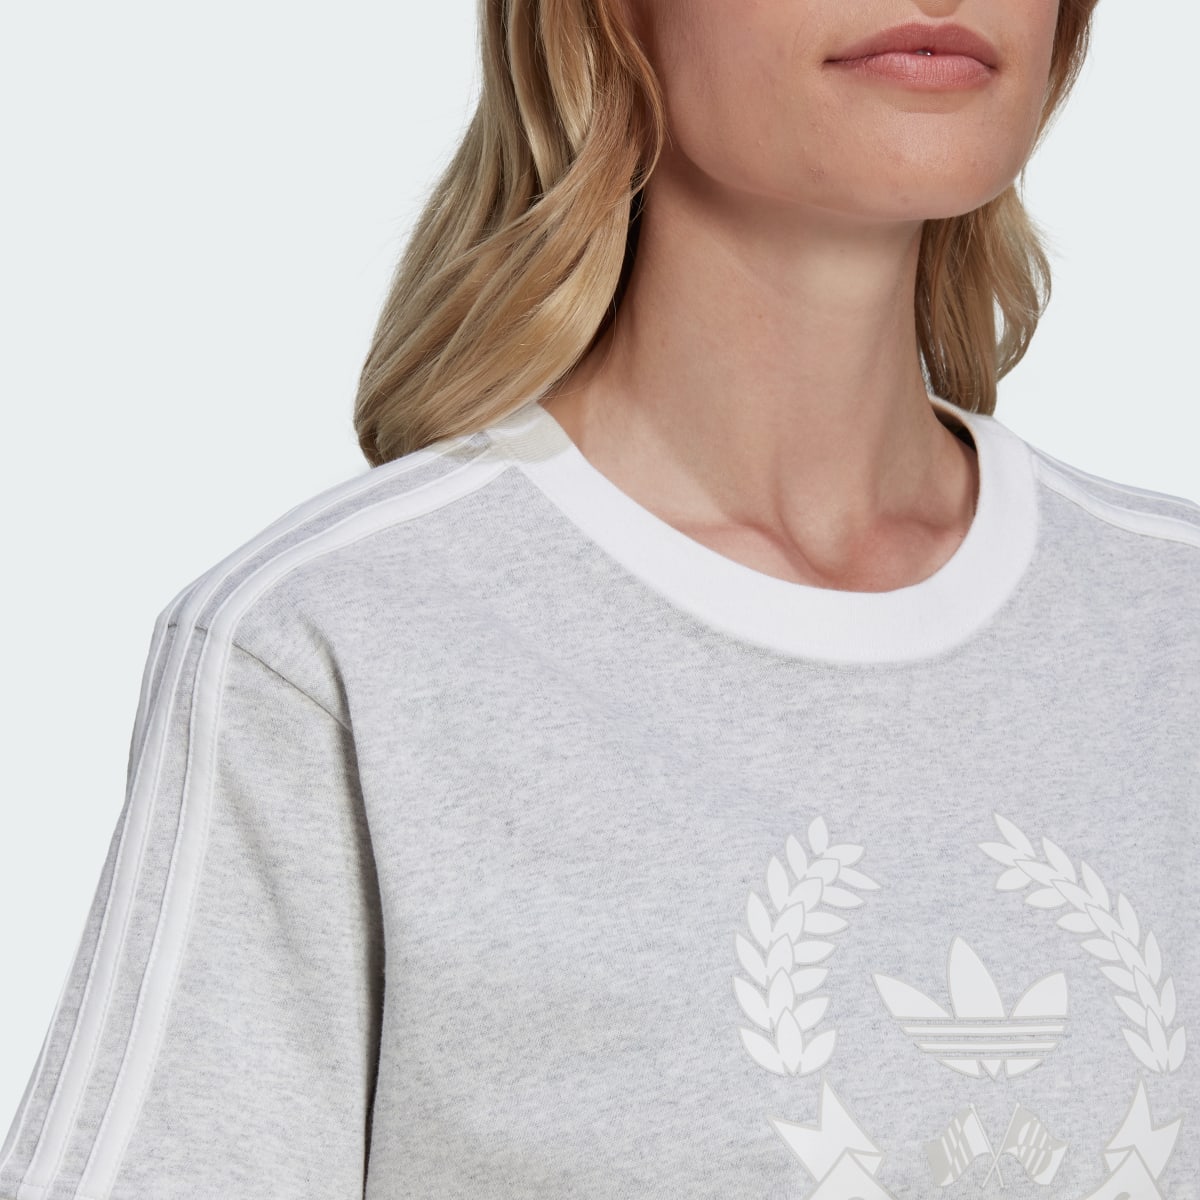 Adidas T-Shirt with Crest Graphic. 6